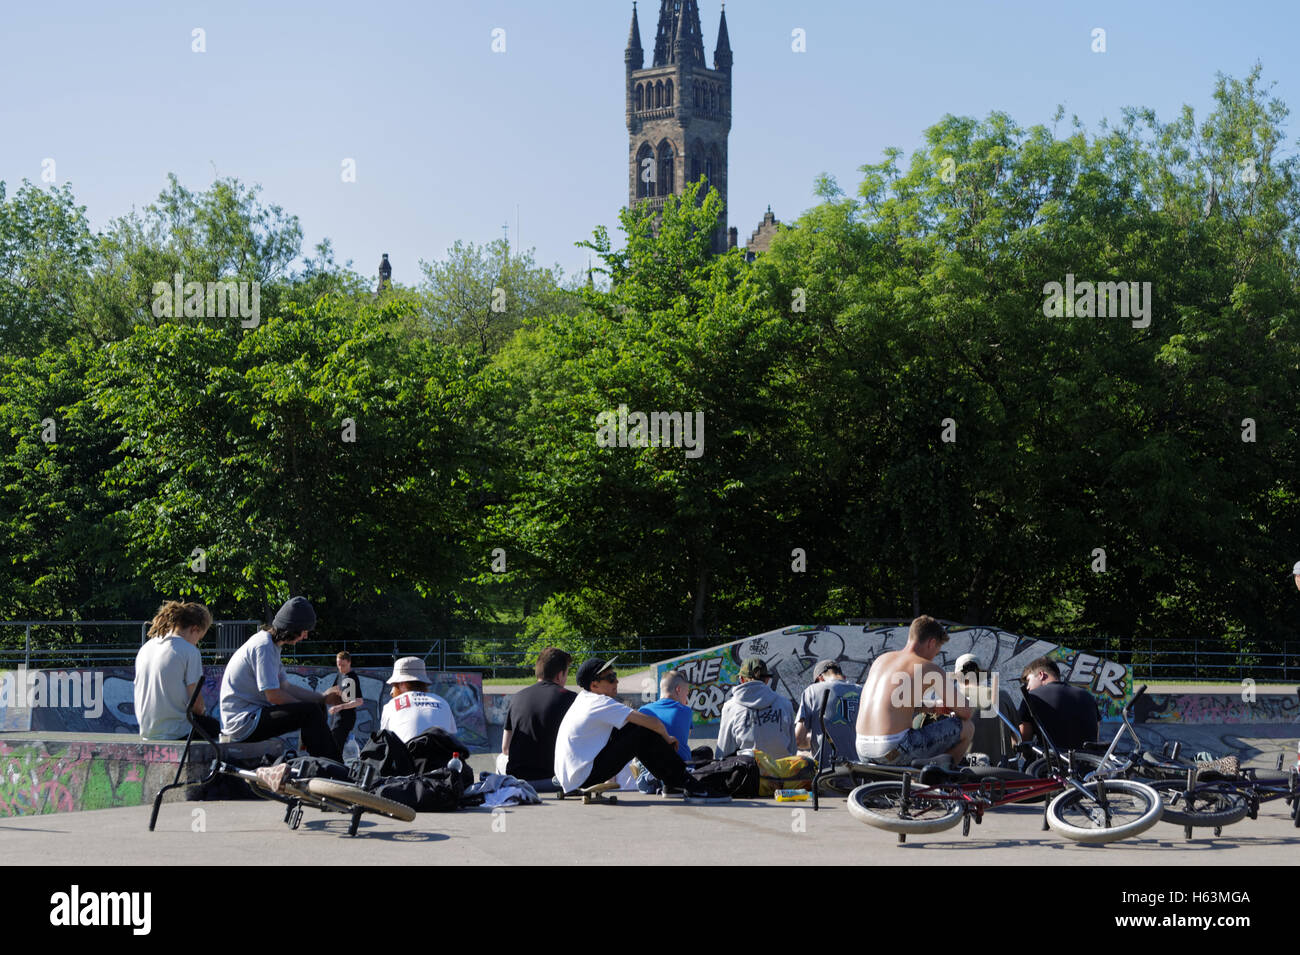 BMX bikers skaters boys girls Glasgow kelvingrove  park which contains both the university and the museum in the Park area Stock Photo